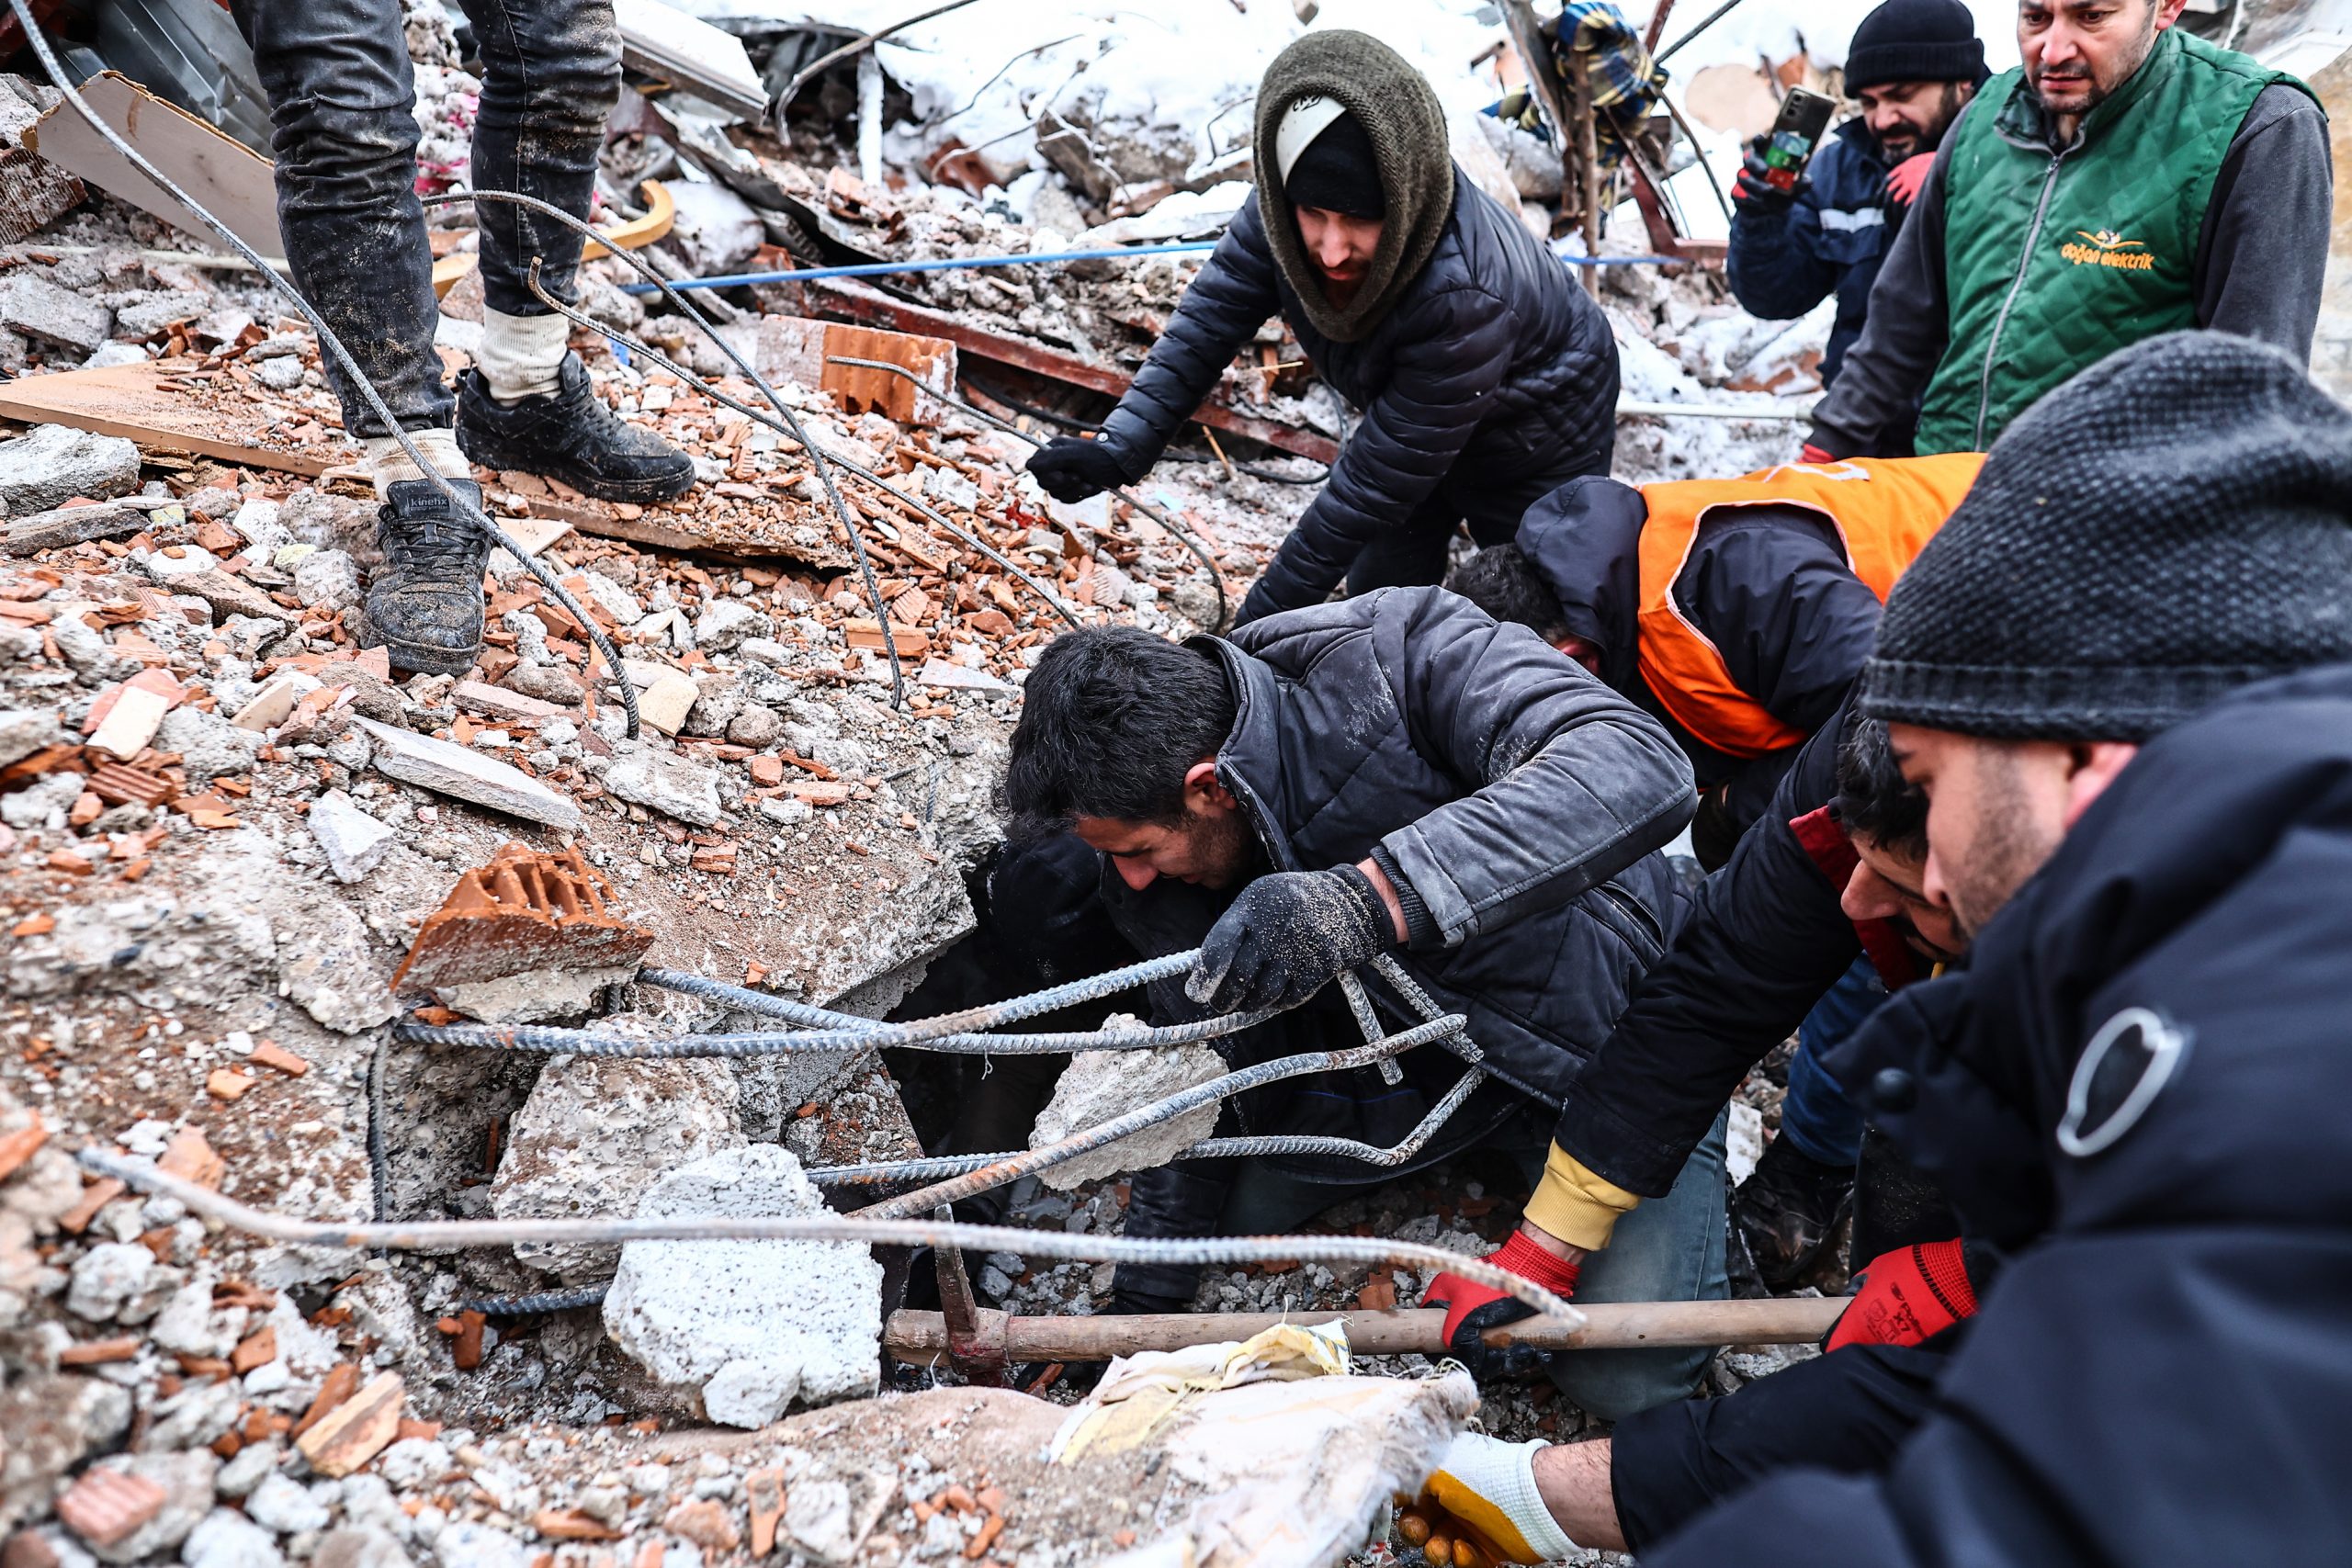 epa10453199 Emergency personnel search for victims at the site of a collapsed building in the aftermath of a powerful earthquake in the Elbistan district of Kahramanmaras, southeastern Turkey, 07 February 2023. Thousands of people died and thousands more were injured after major earthquakes struck southern Turkey and northern Syria on 06 February. Authorities fear the death toll will keep climbing as rescuers look for survivors across the region.  EPA/SEDAT SUNA